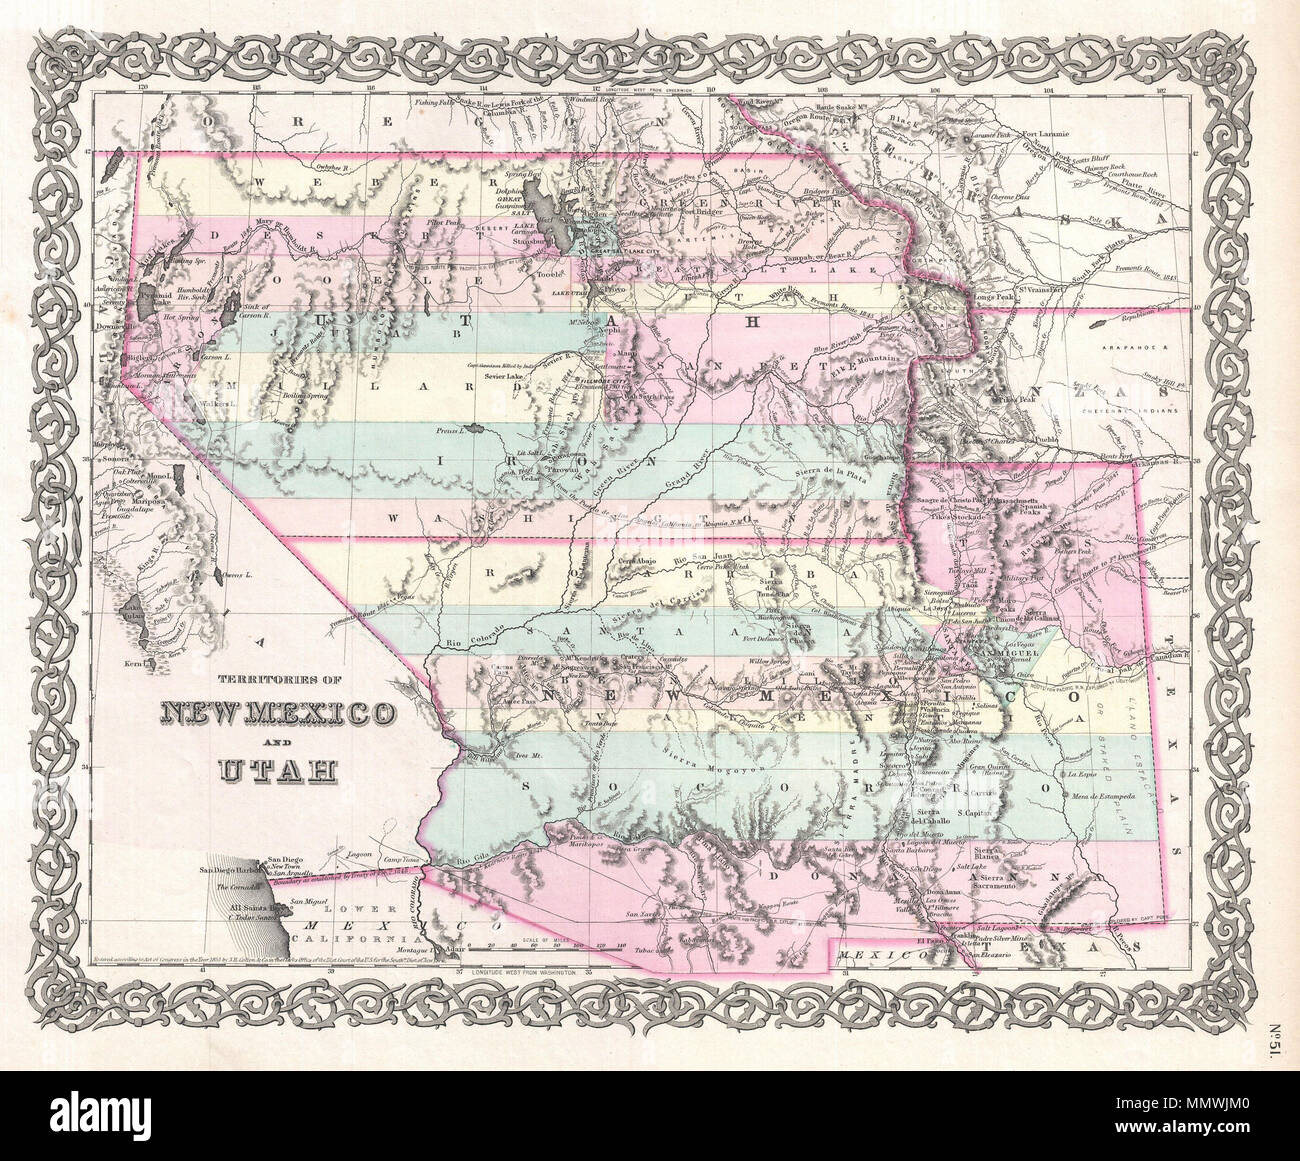 .  English: An iconic map of the American west and one of the rarest and most desirable of all Colton atlas maps. This is an extraordinary example of the first edition first state of Colton's 1855 map of the territories of New Mexico and Utah. This is one of the rarest and most desirable of all Colton atlas maps. Based on earlier wall map produced by Colton and D. Griffing Johnson, this map details the regions between the California and Texas and between Oregon and Mexico. Covers territorial New Mexico and Utah including the modern day states of Nevada, Colorado, and Arizona. Colton identifies Stock Photo